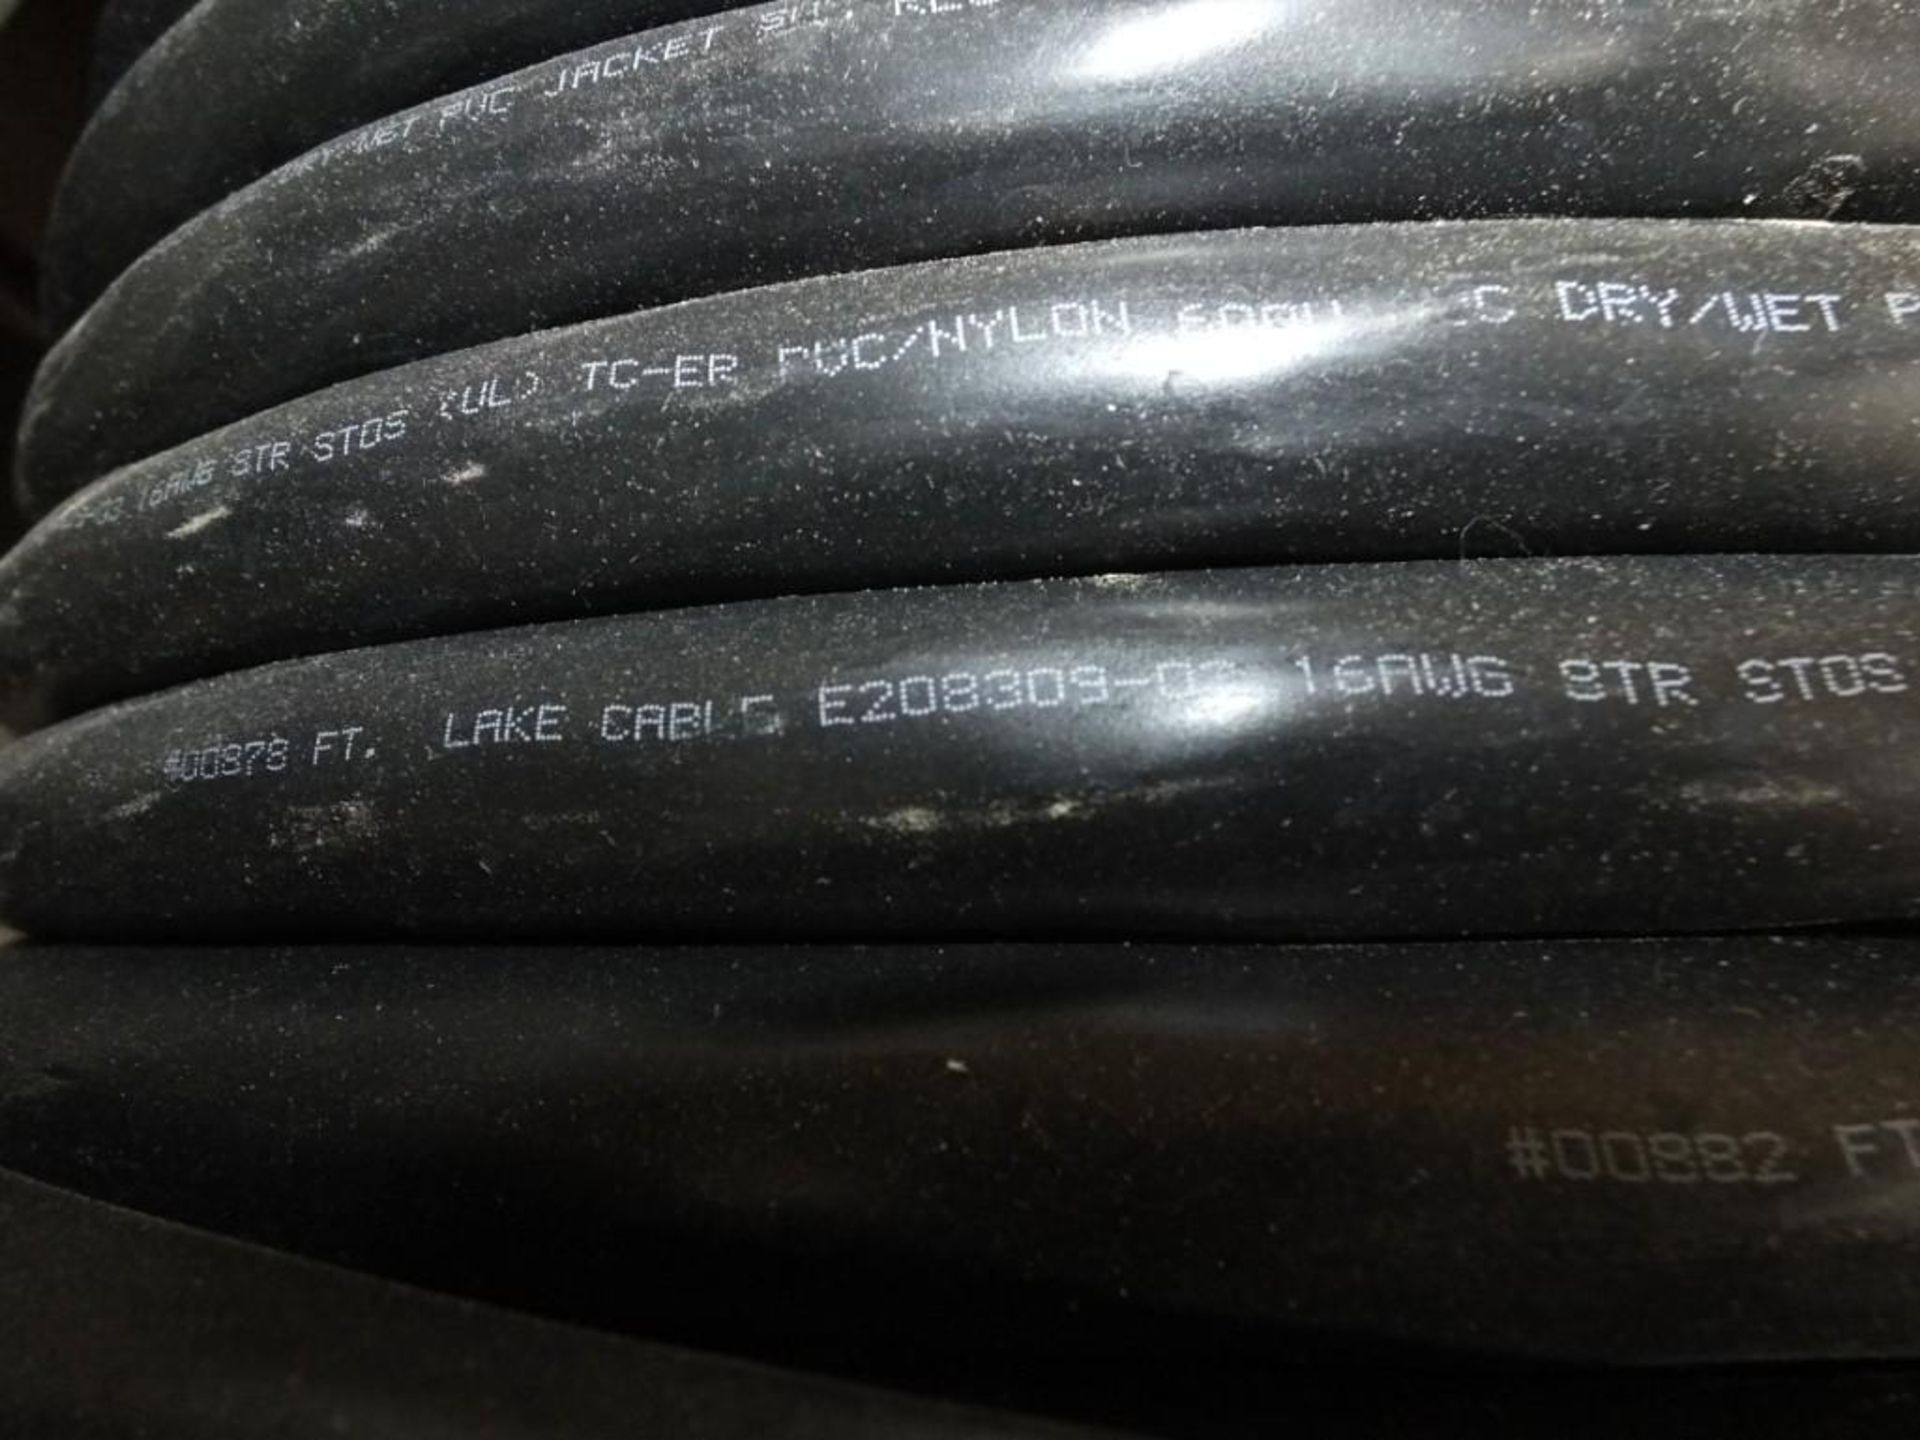 Cable Spool: Lake Cable 16AWG STR STOS - Image 3 of 5